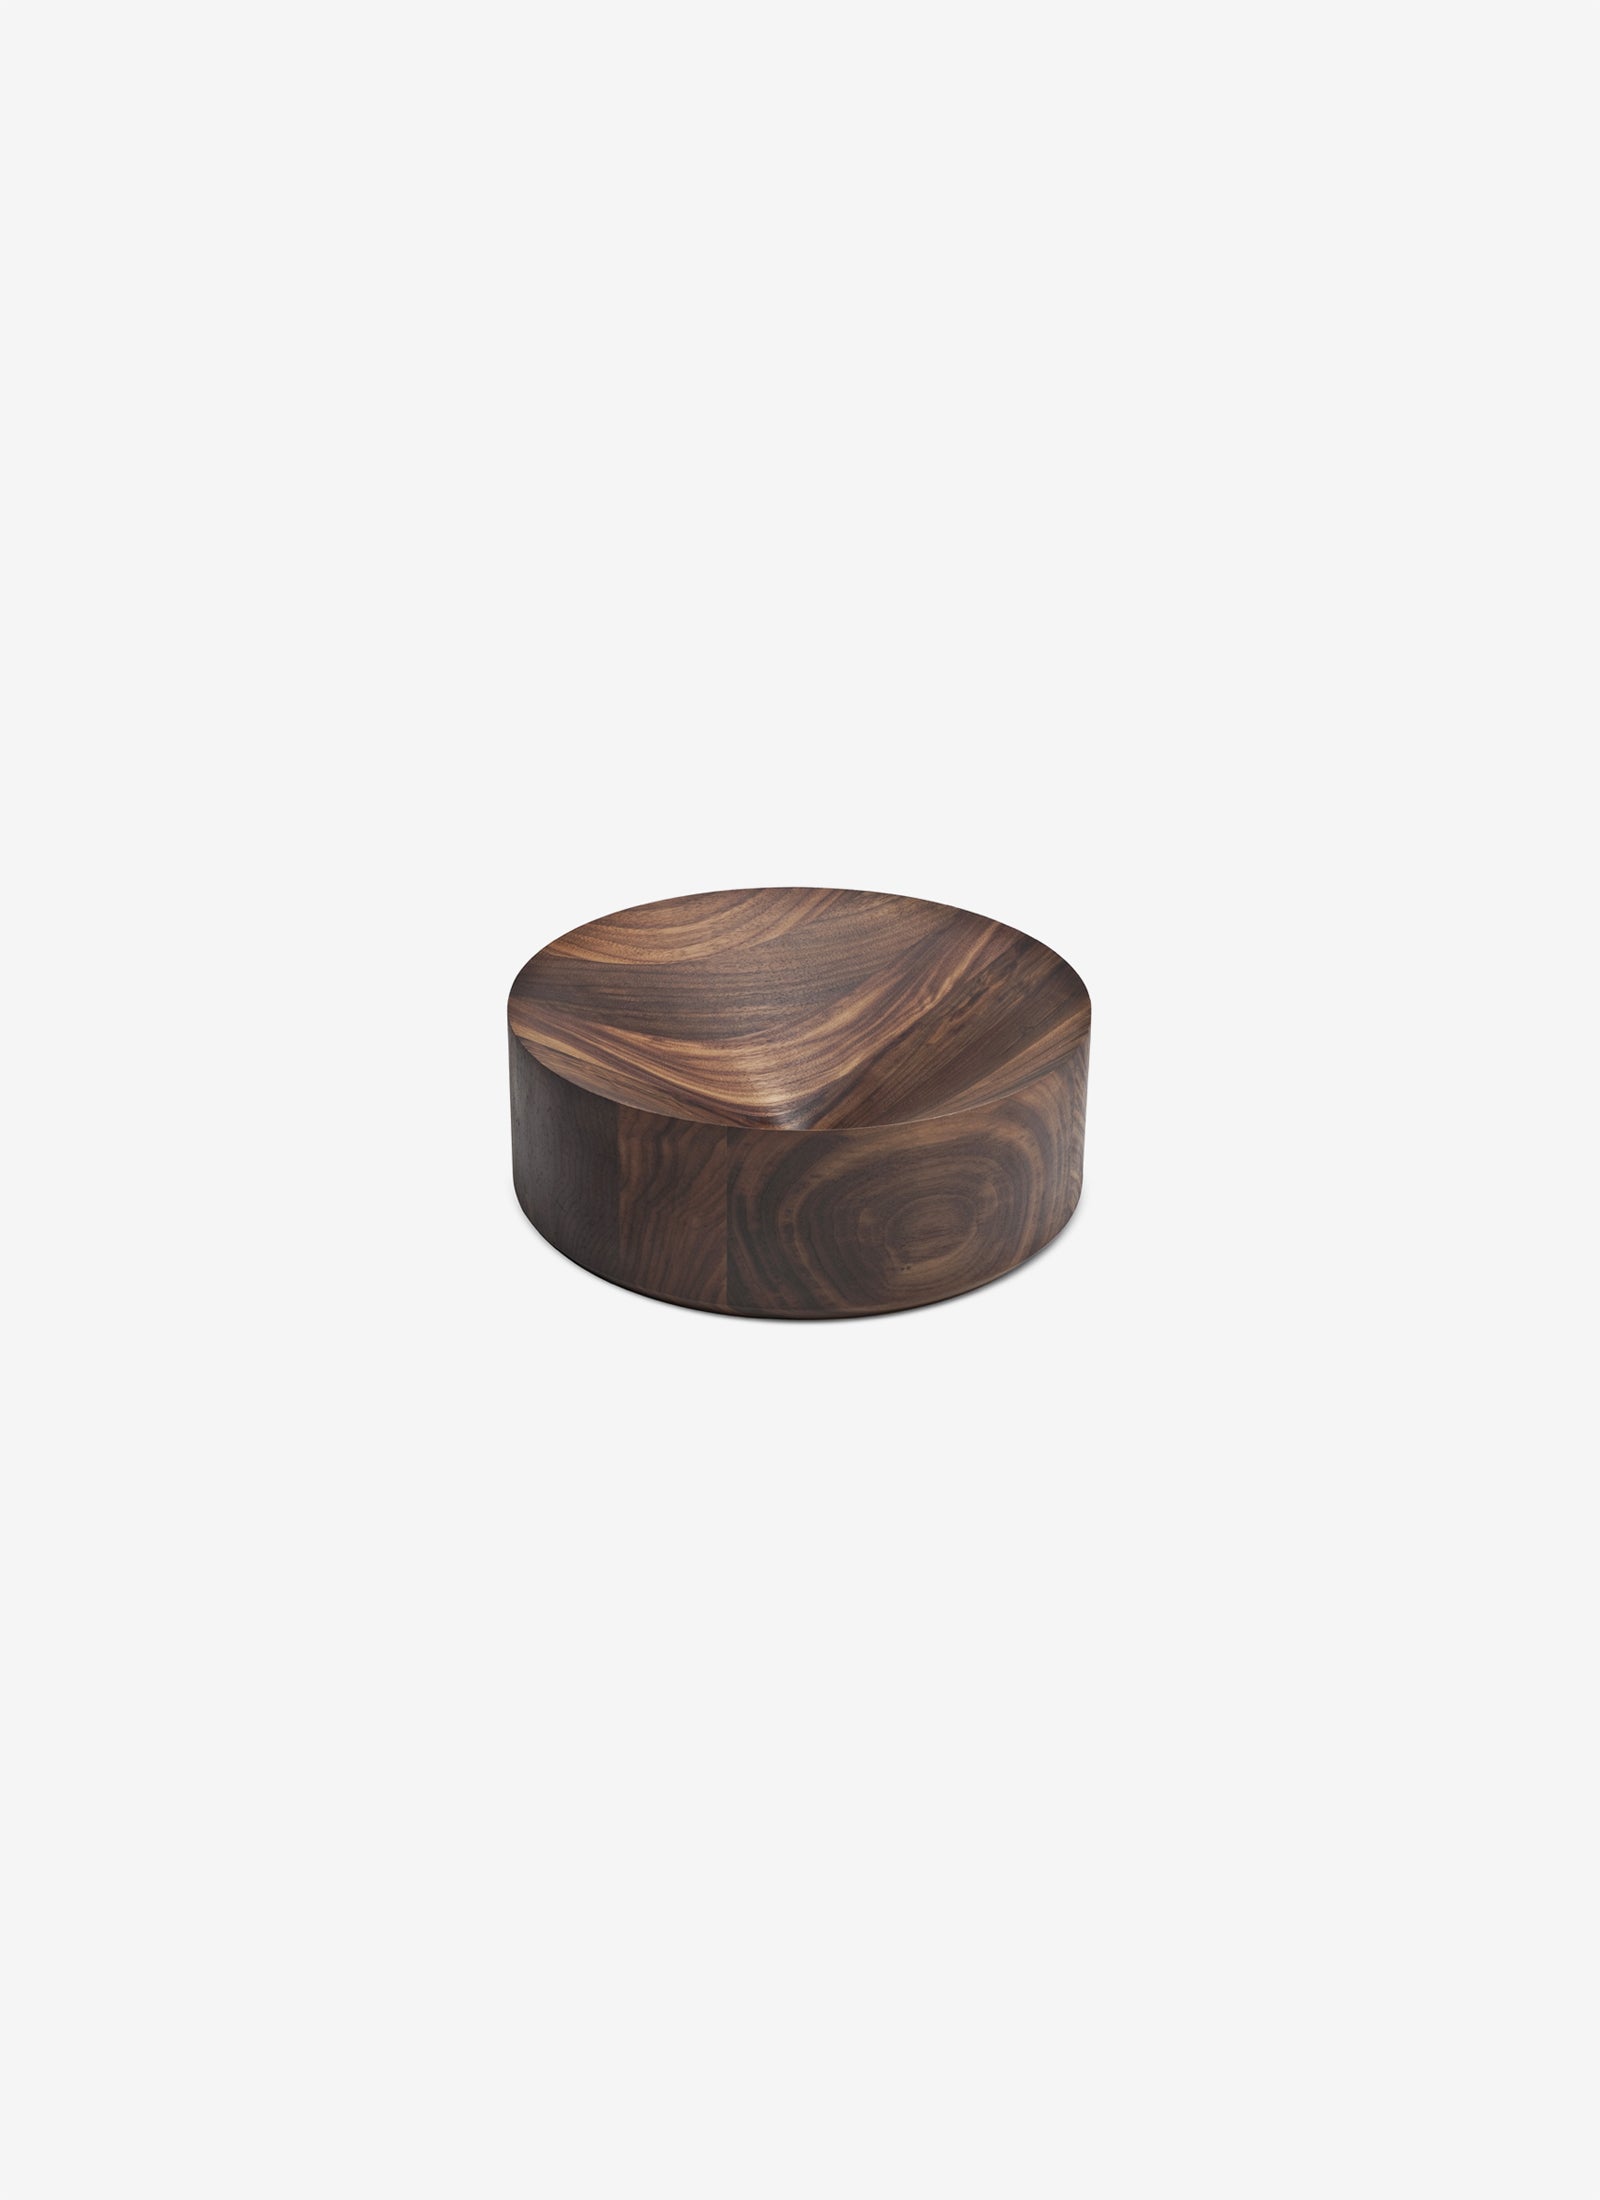 Solid Walnut Coupe Bowl by Michael Verheyden